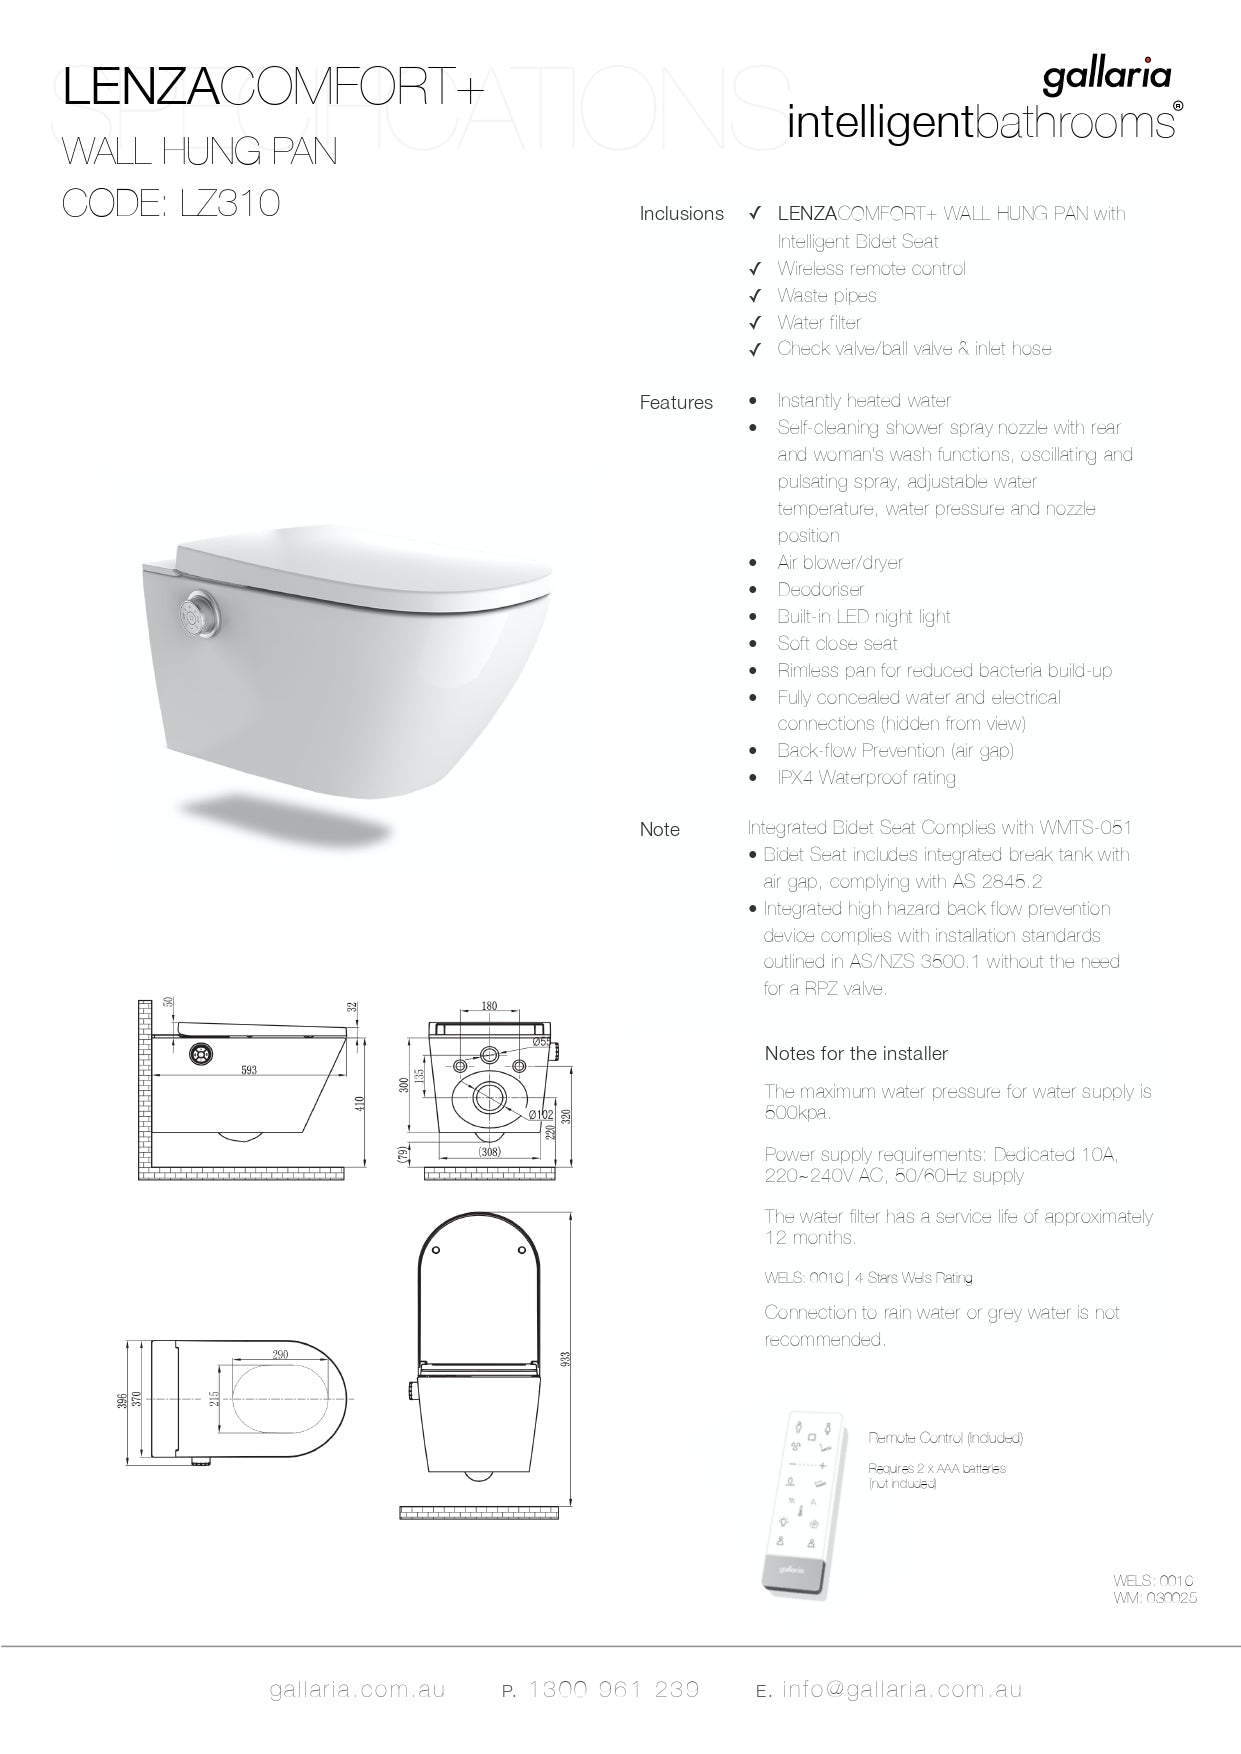 GALLARIA LENZA COMFORT RIMLESS WALL HUNG PAN AND REMOTE WASHLET PACKAGE GLOSS WHITE